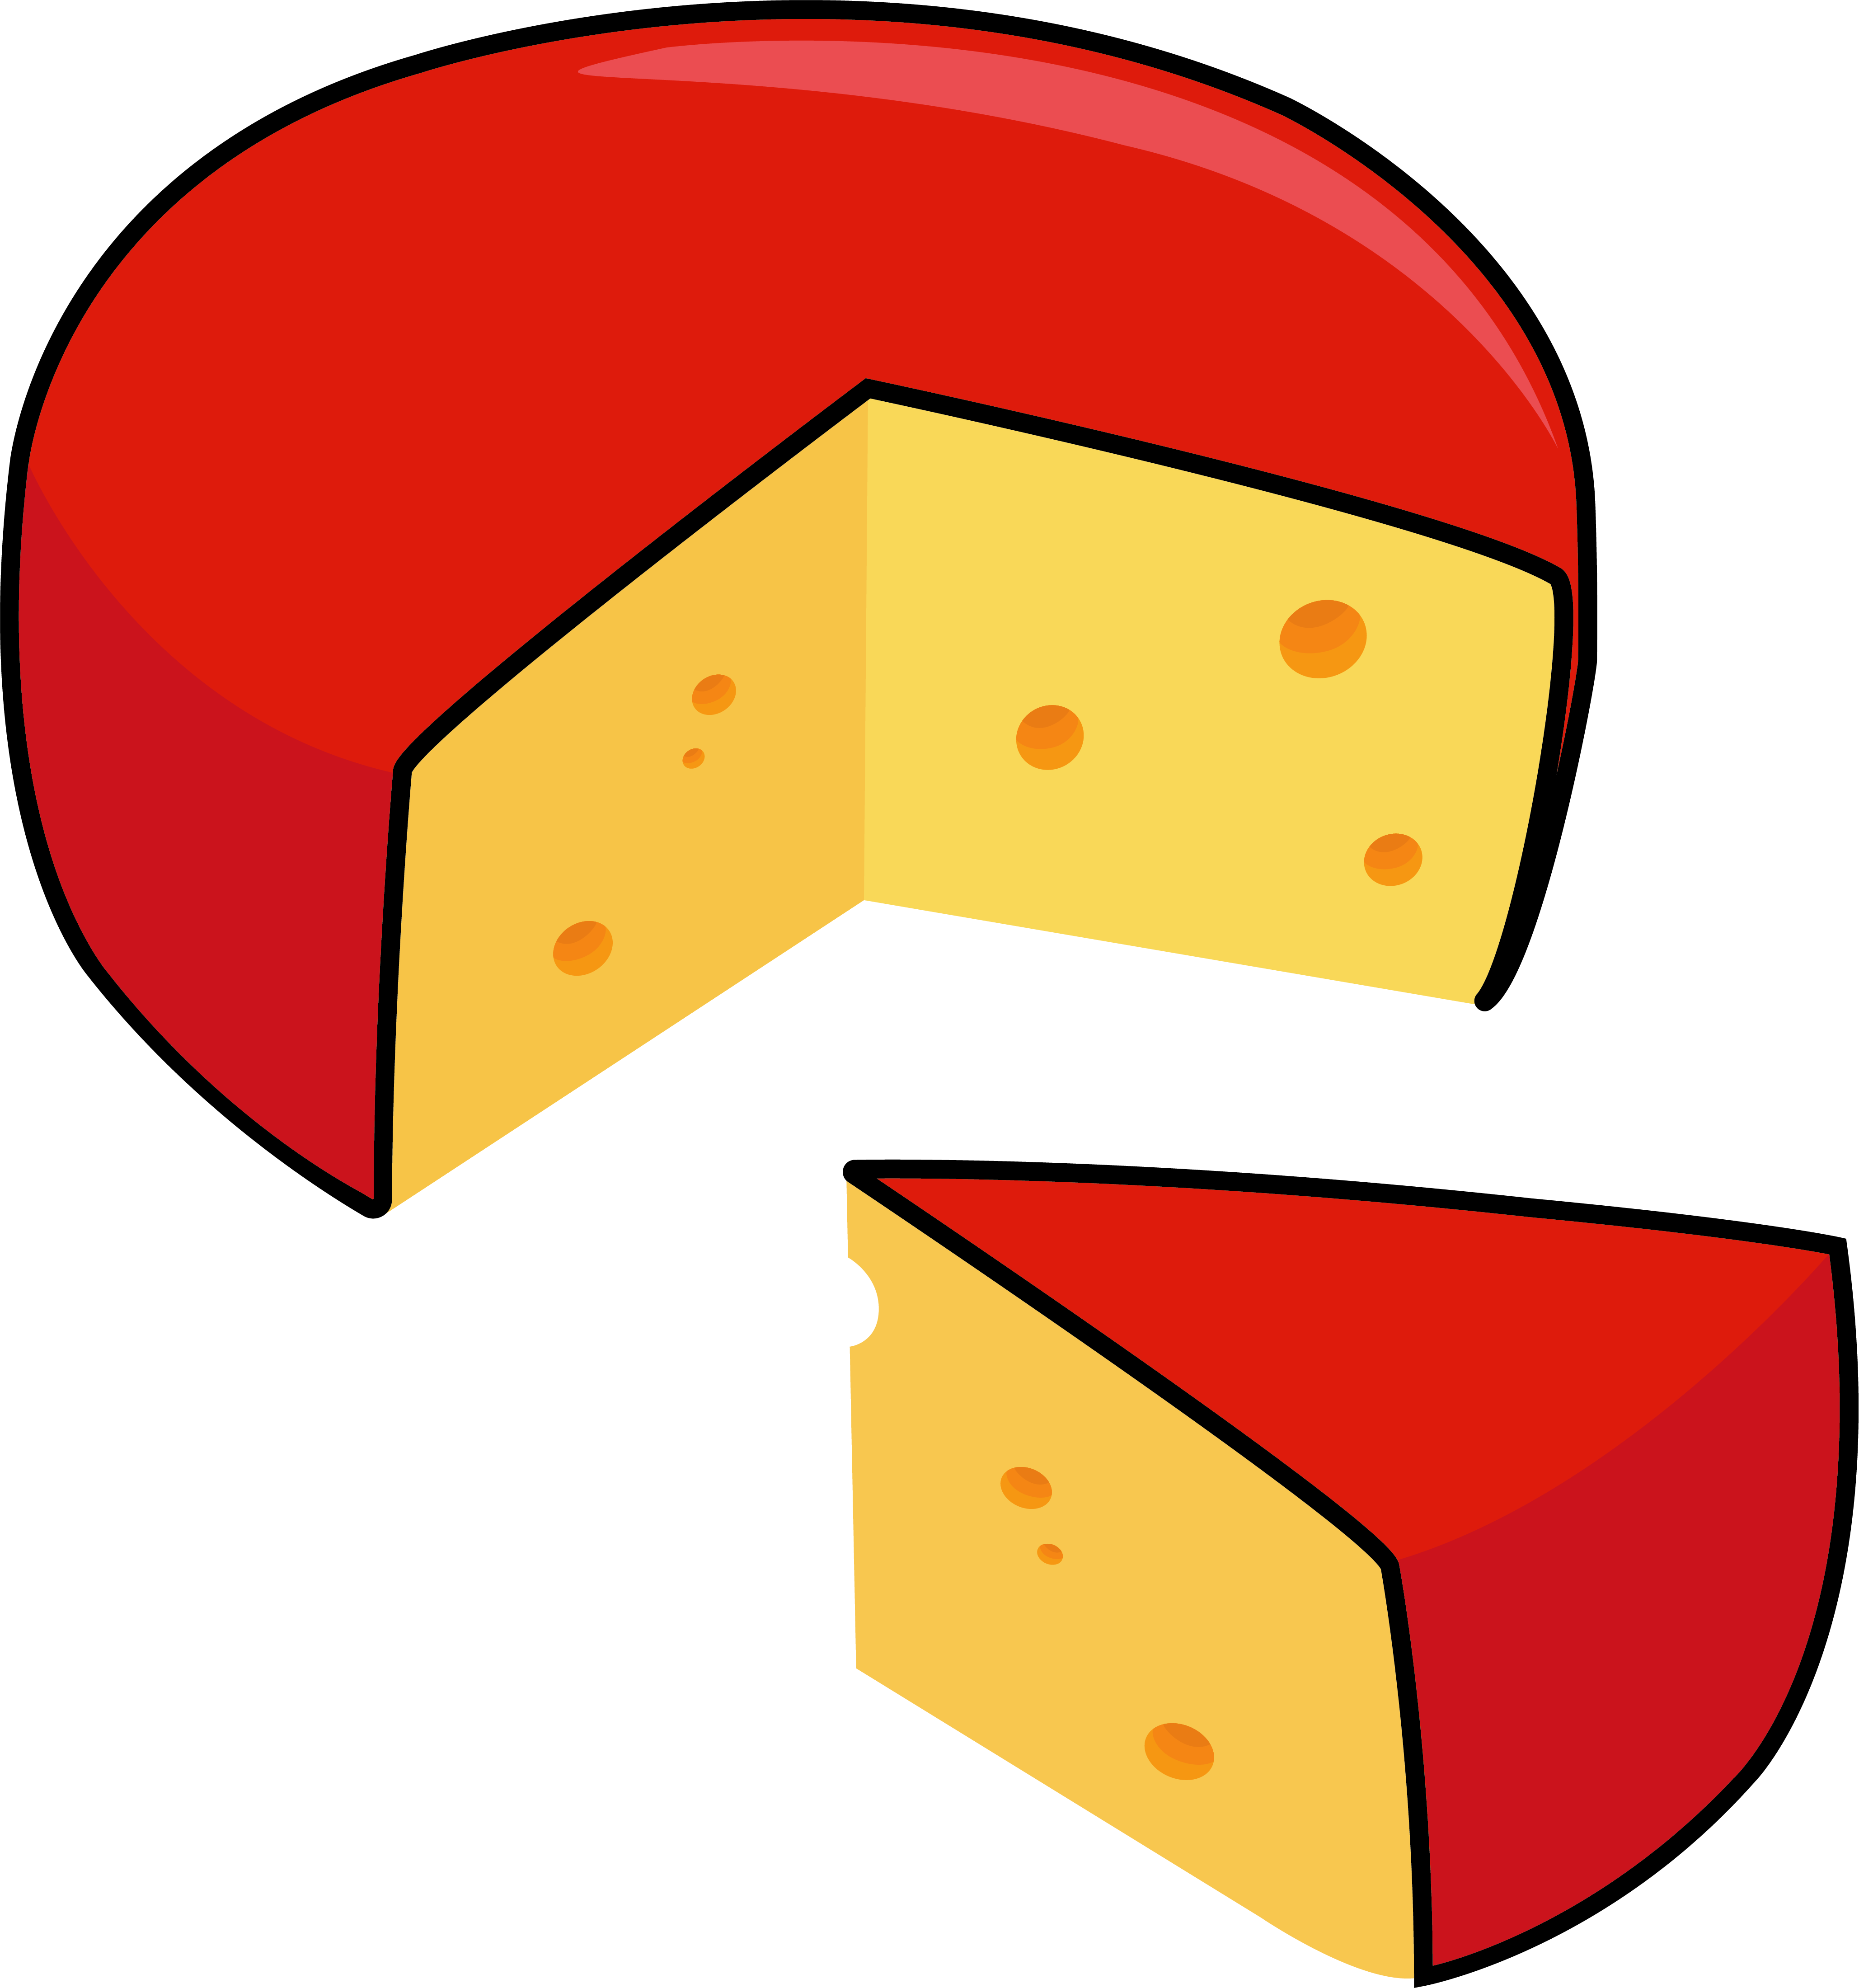 A wheel of cheese